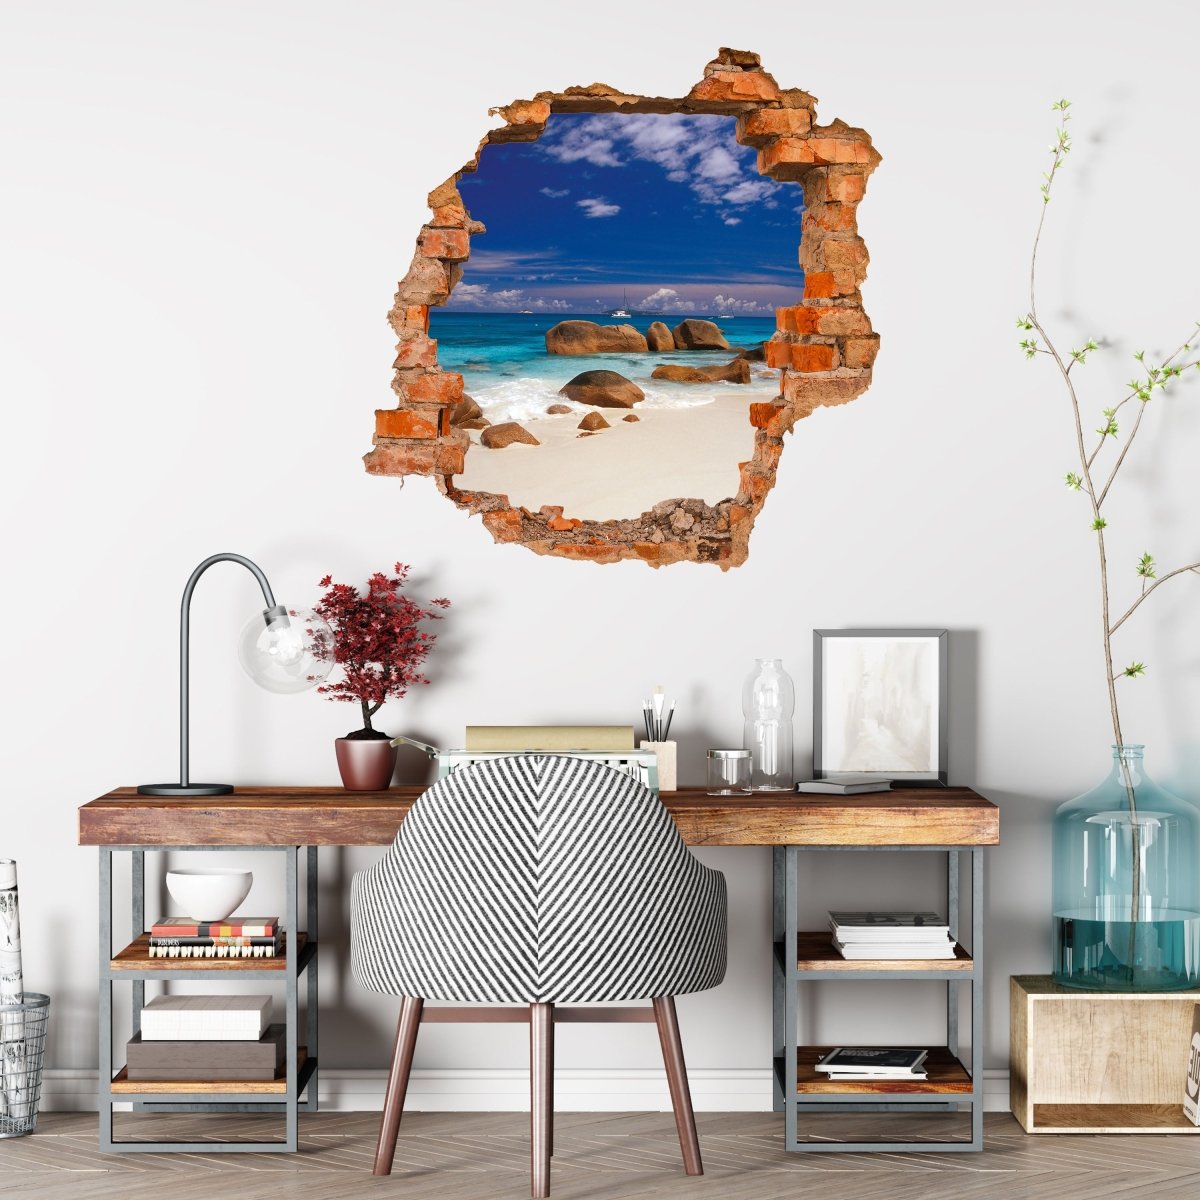 3D wall sticker sea view - wall decal M0014